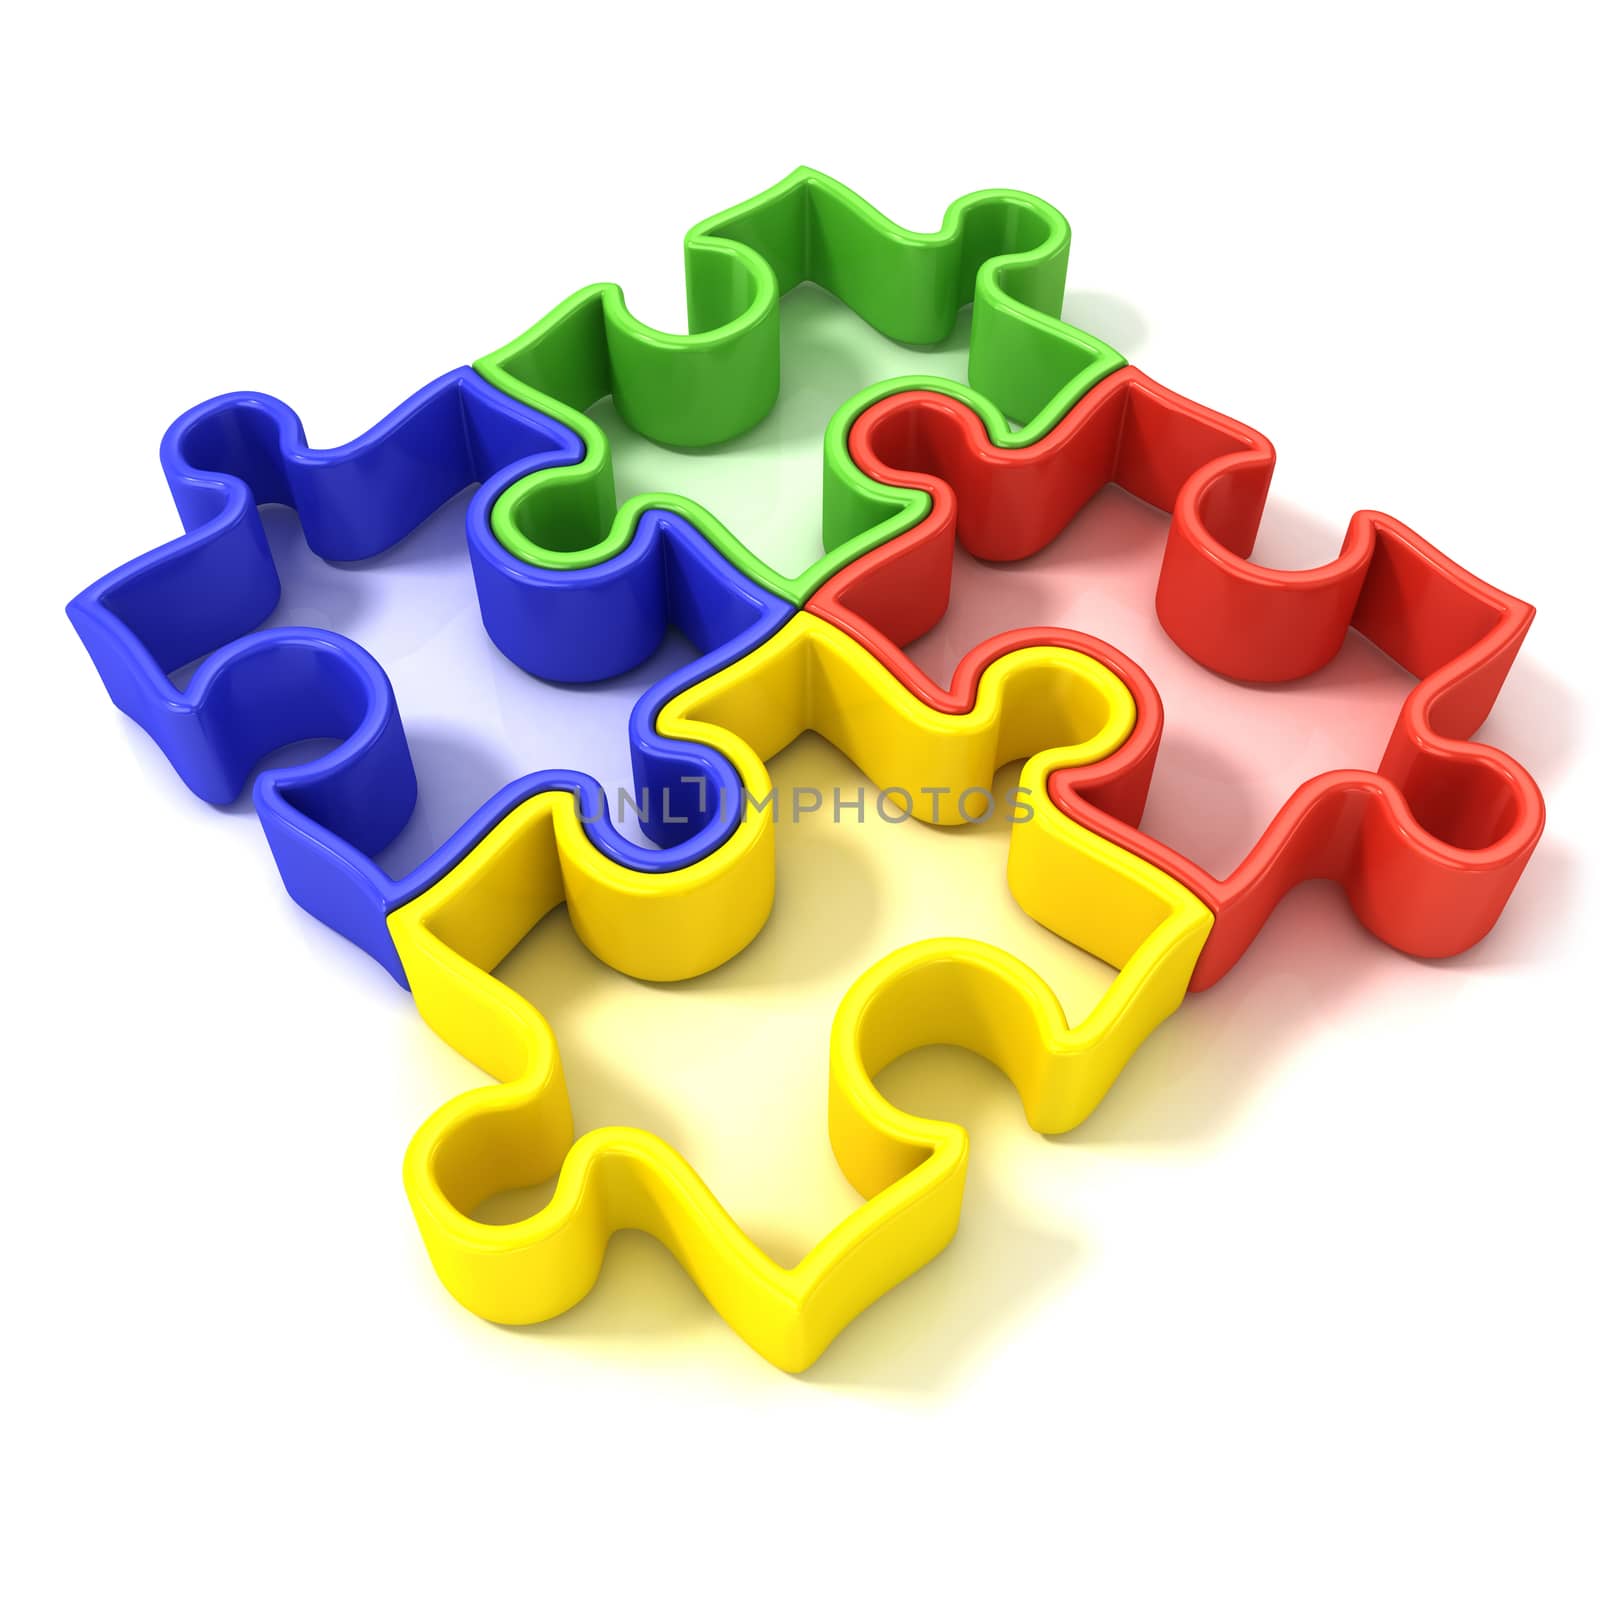 Four colorful outlined jigsaw puzzle pieces, banded. Isolated on a white background. Top view